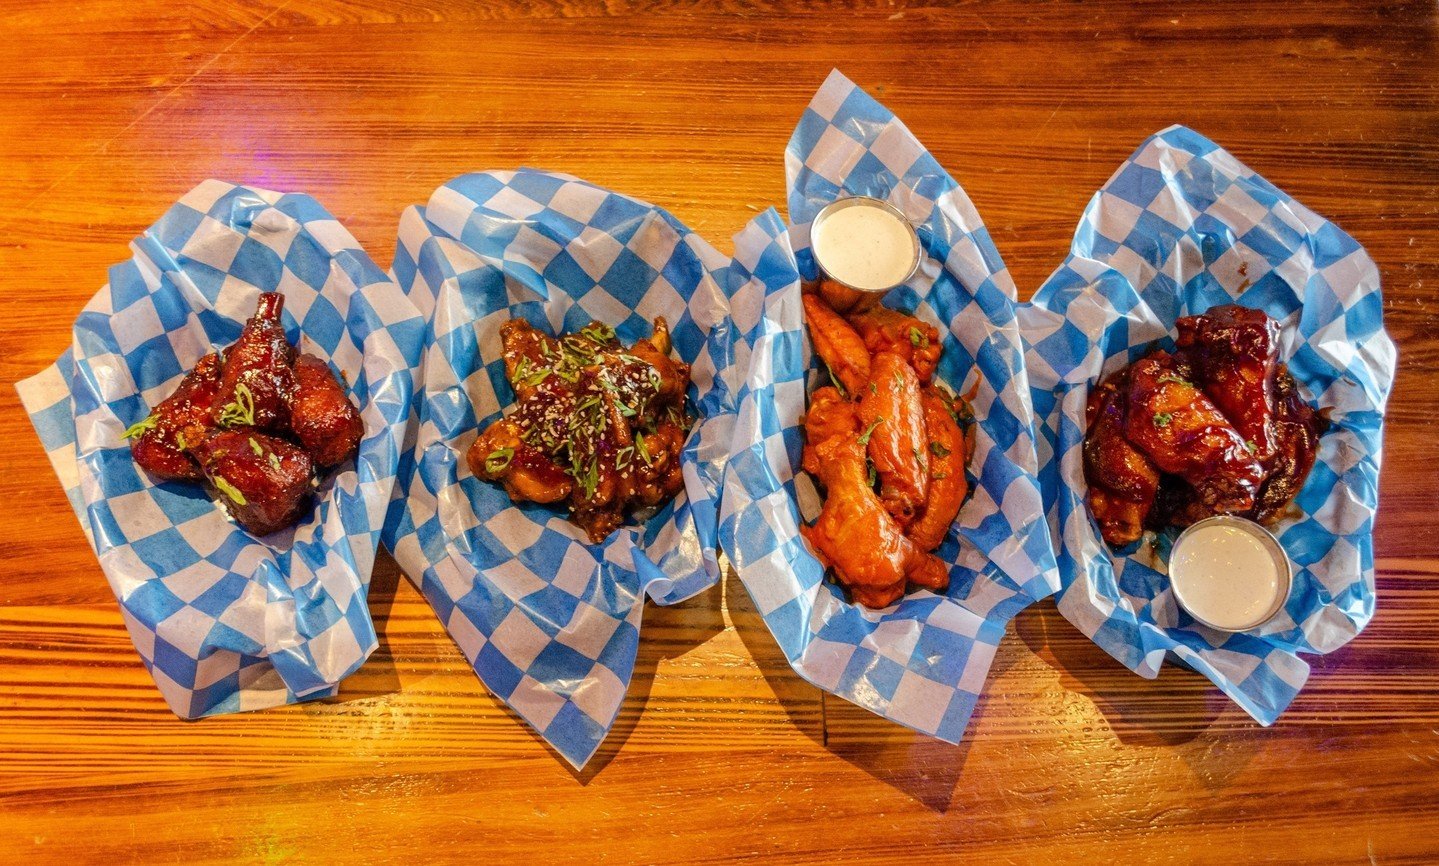 Craving wings? Moonlighter has you covered. Spend your Sunday sampling all the different kinds of wings we have, sip on a cocktail or try a new beer! The White Sox play at 1:10 and the Cubs game is on at 6:10pm. We&rsquo;re open 11AM-Midnight. Come e